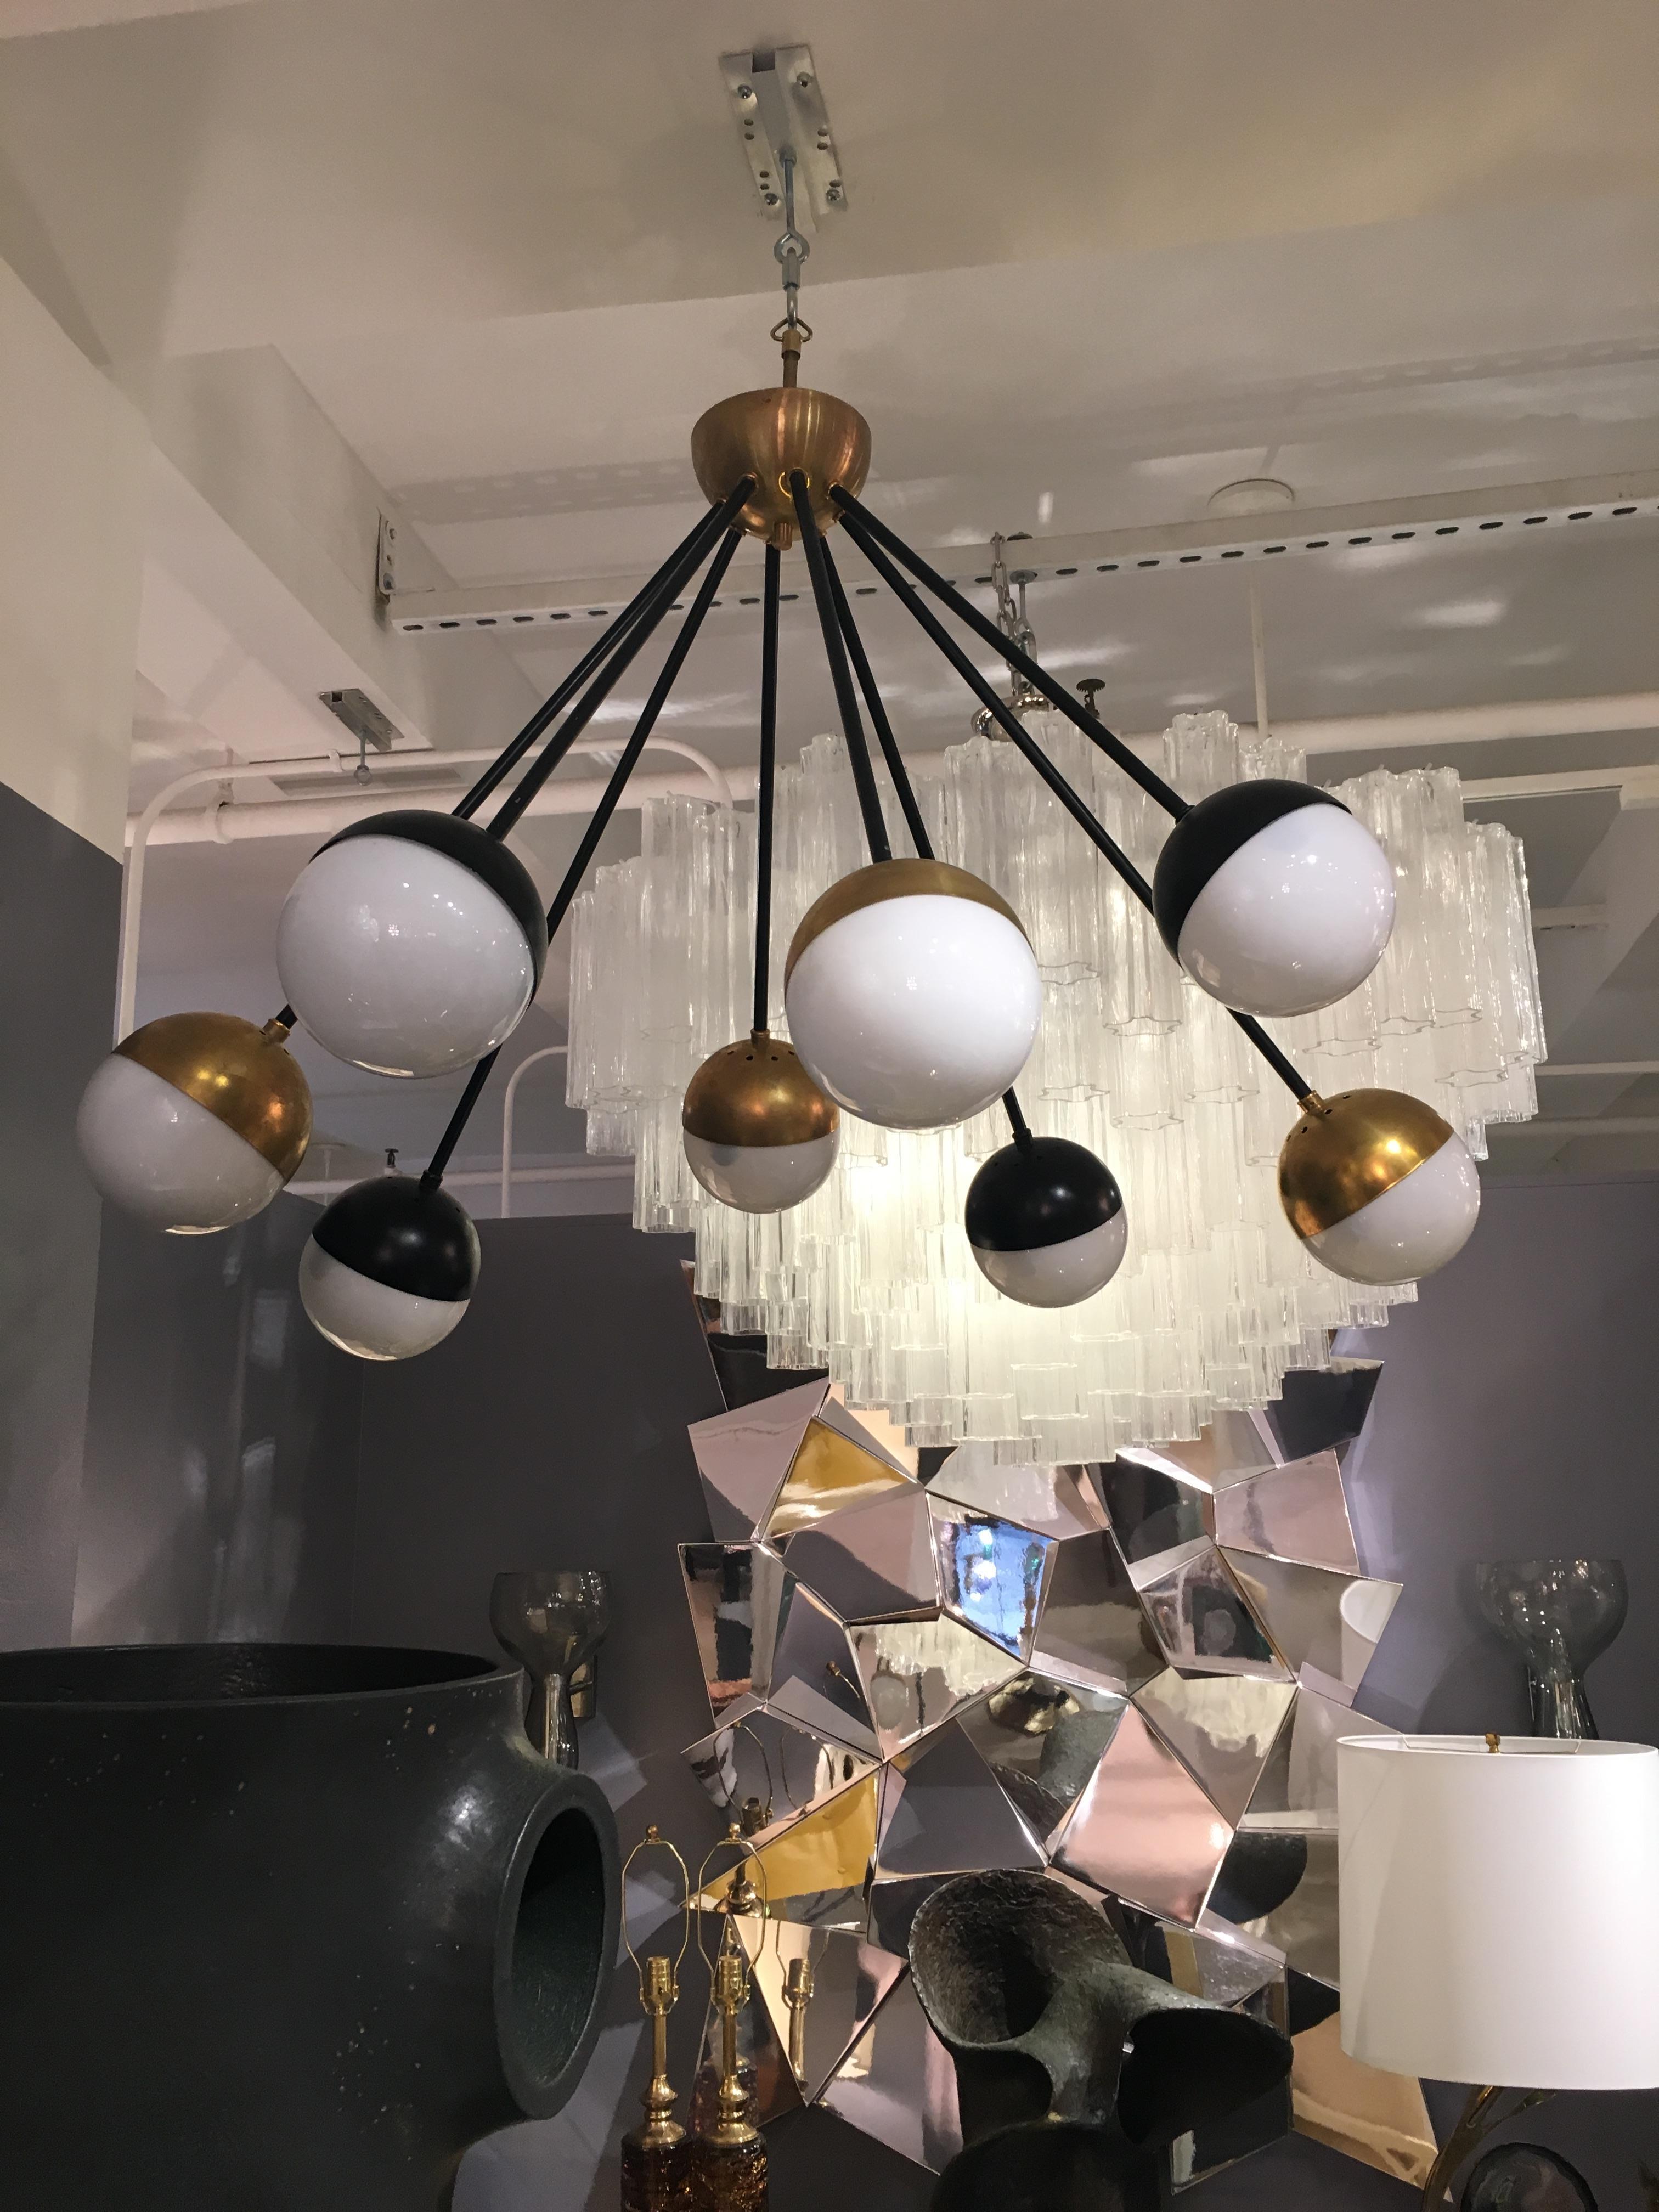 An eight-arm chandelier in brass and black with white globes by Stilnovo.

Italian, Circa 1960's

In stock.

UL Listing Service is available upon request.